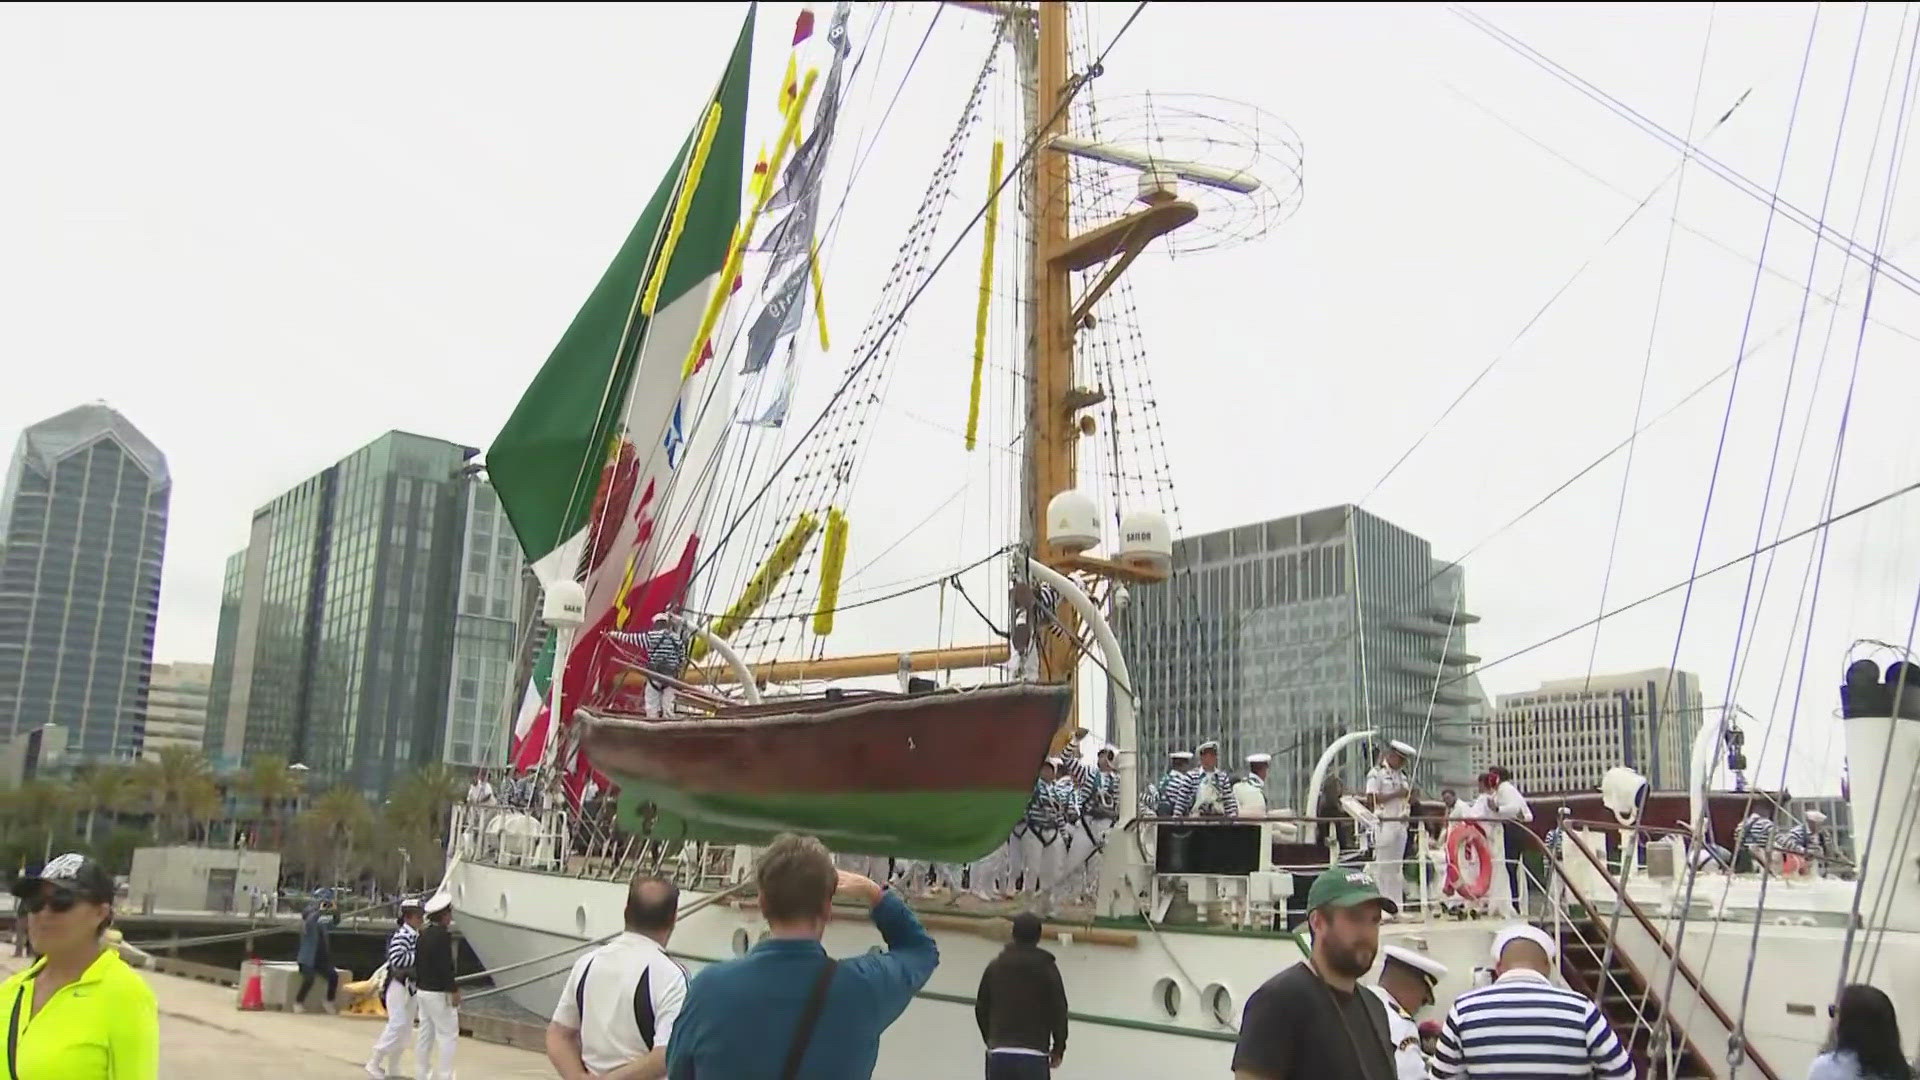 The ship known as the Cuauhtémoc, is visiting San Diego from May 16 through May 17 and you can see it for free this weekend.